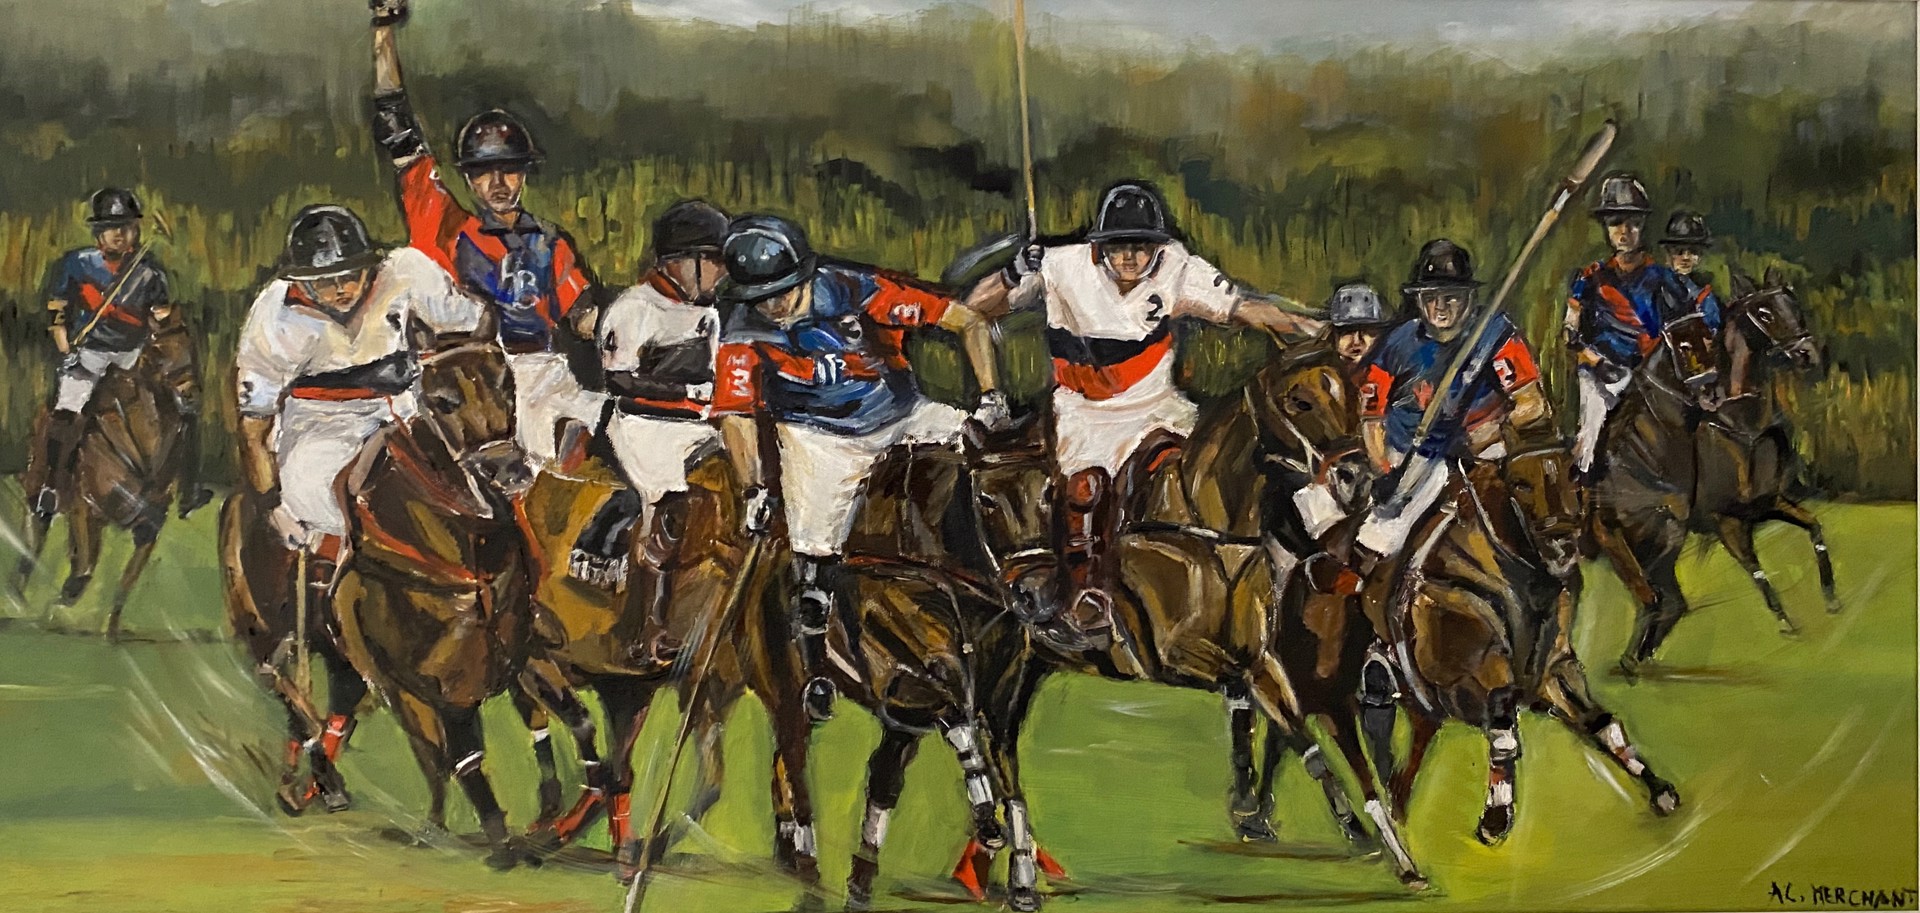 Polo Match at Apremont by Anne-Lise Merchant